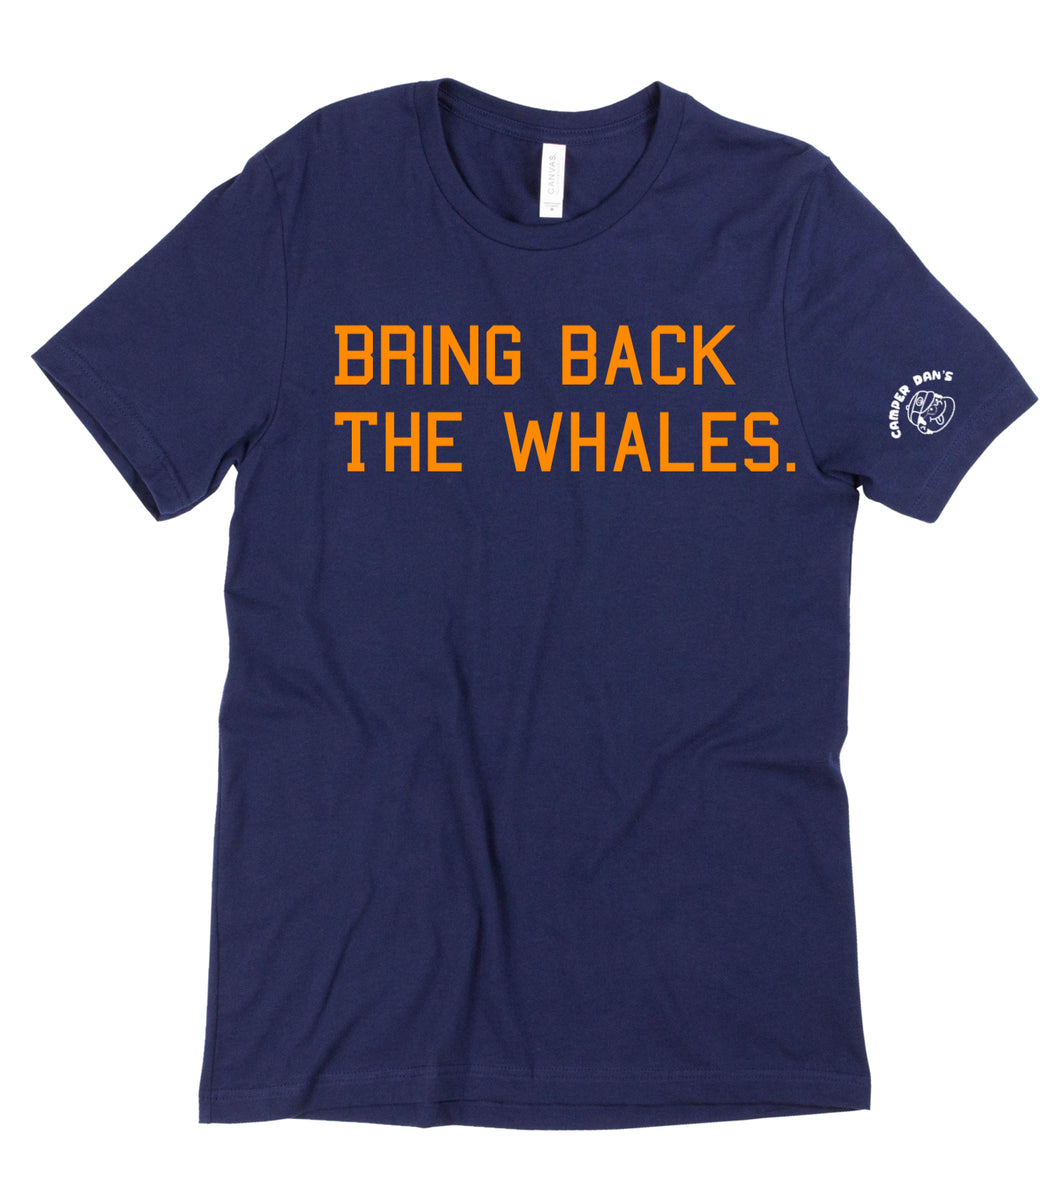 Bring Back The Whales.